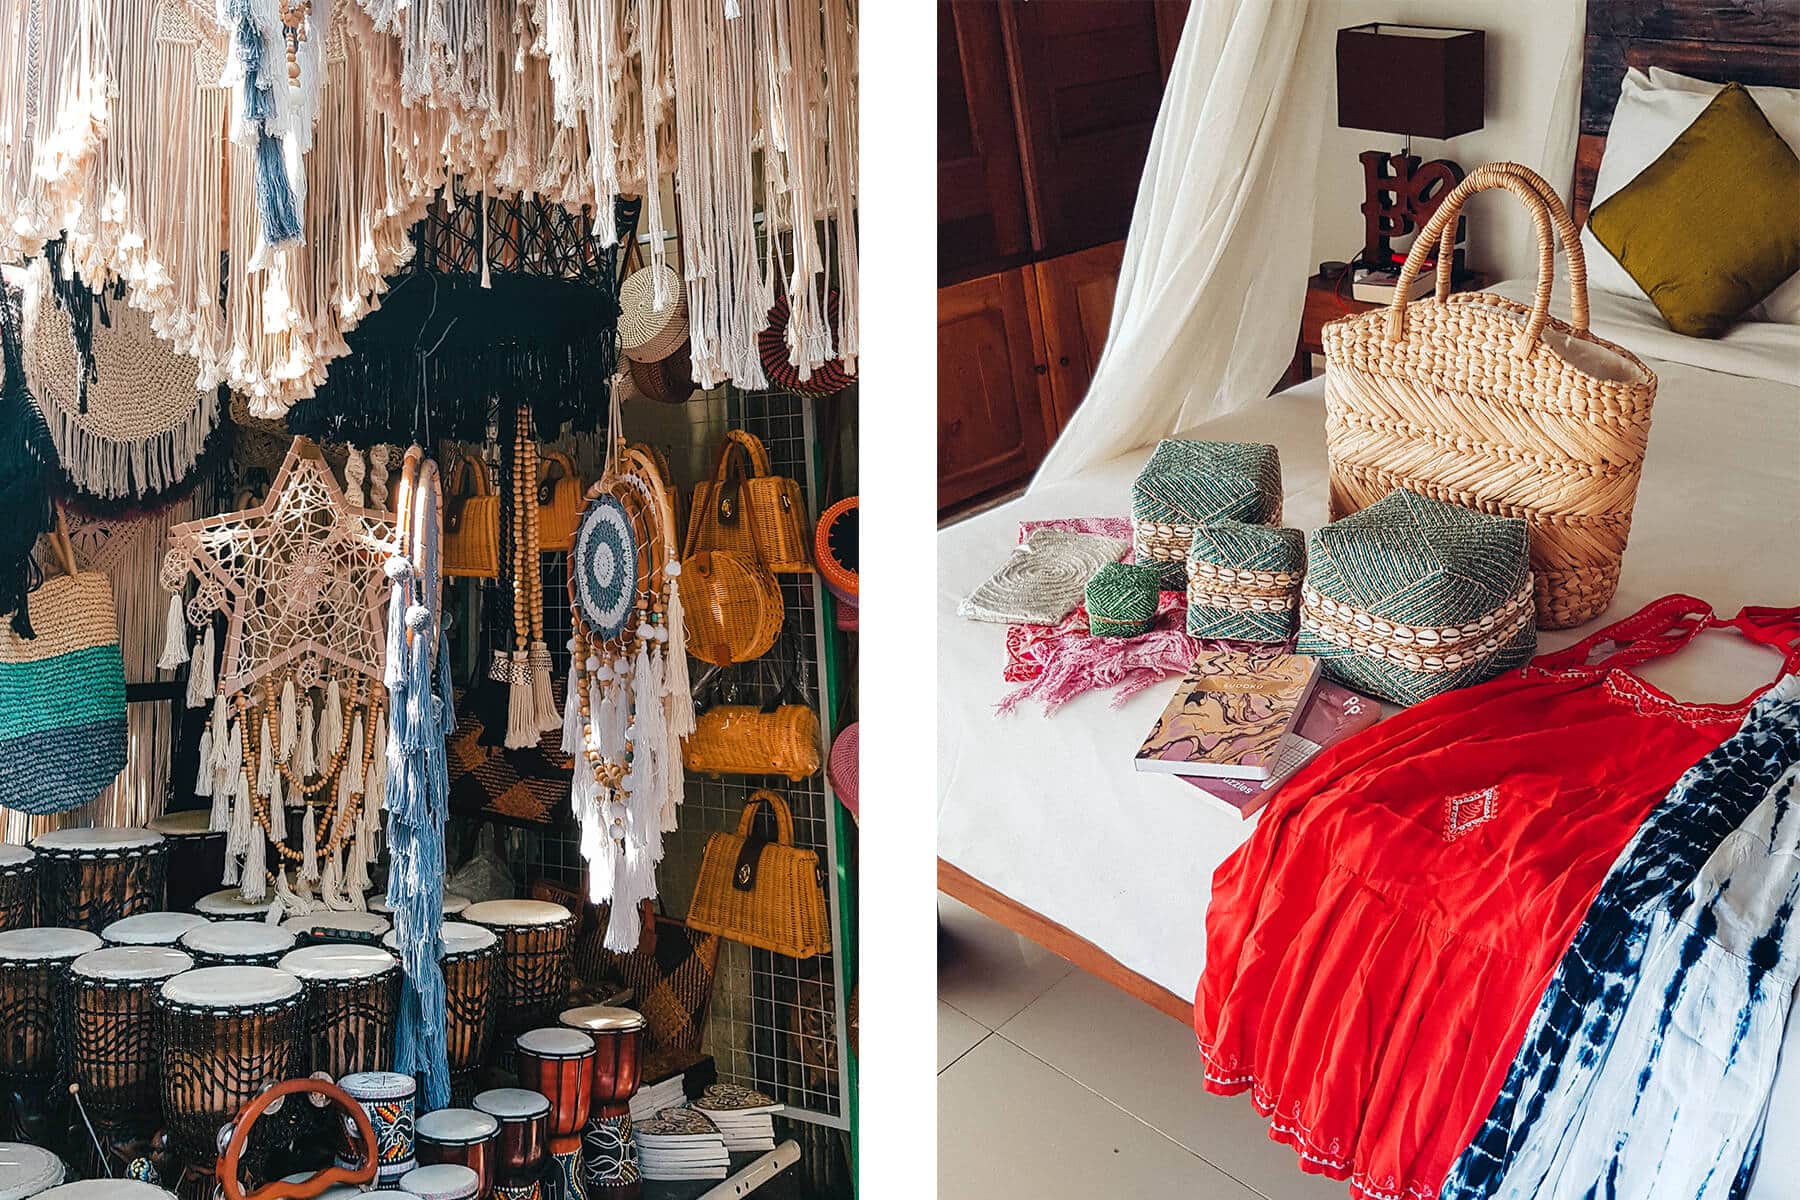 Shopping for macramé and rattan bags at the markets, one of the top things to do in Bali.